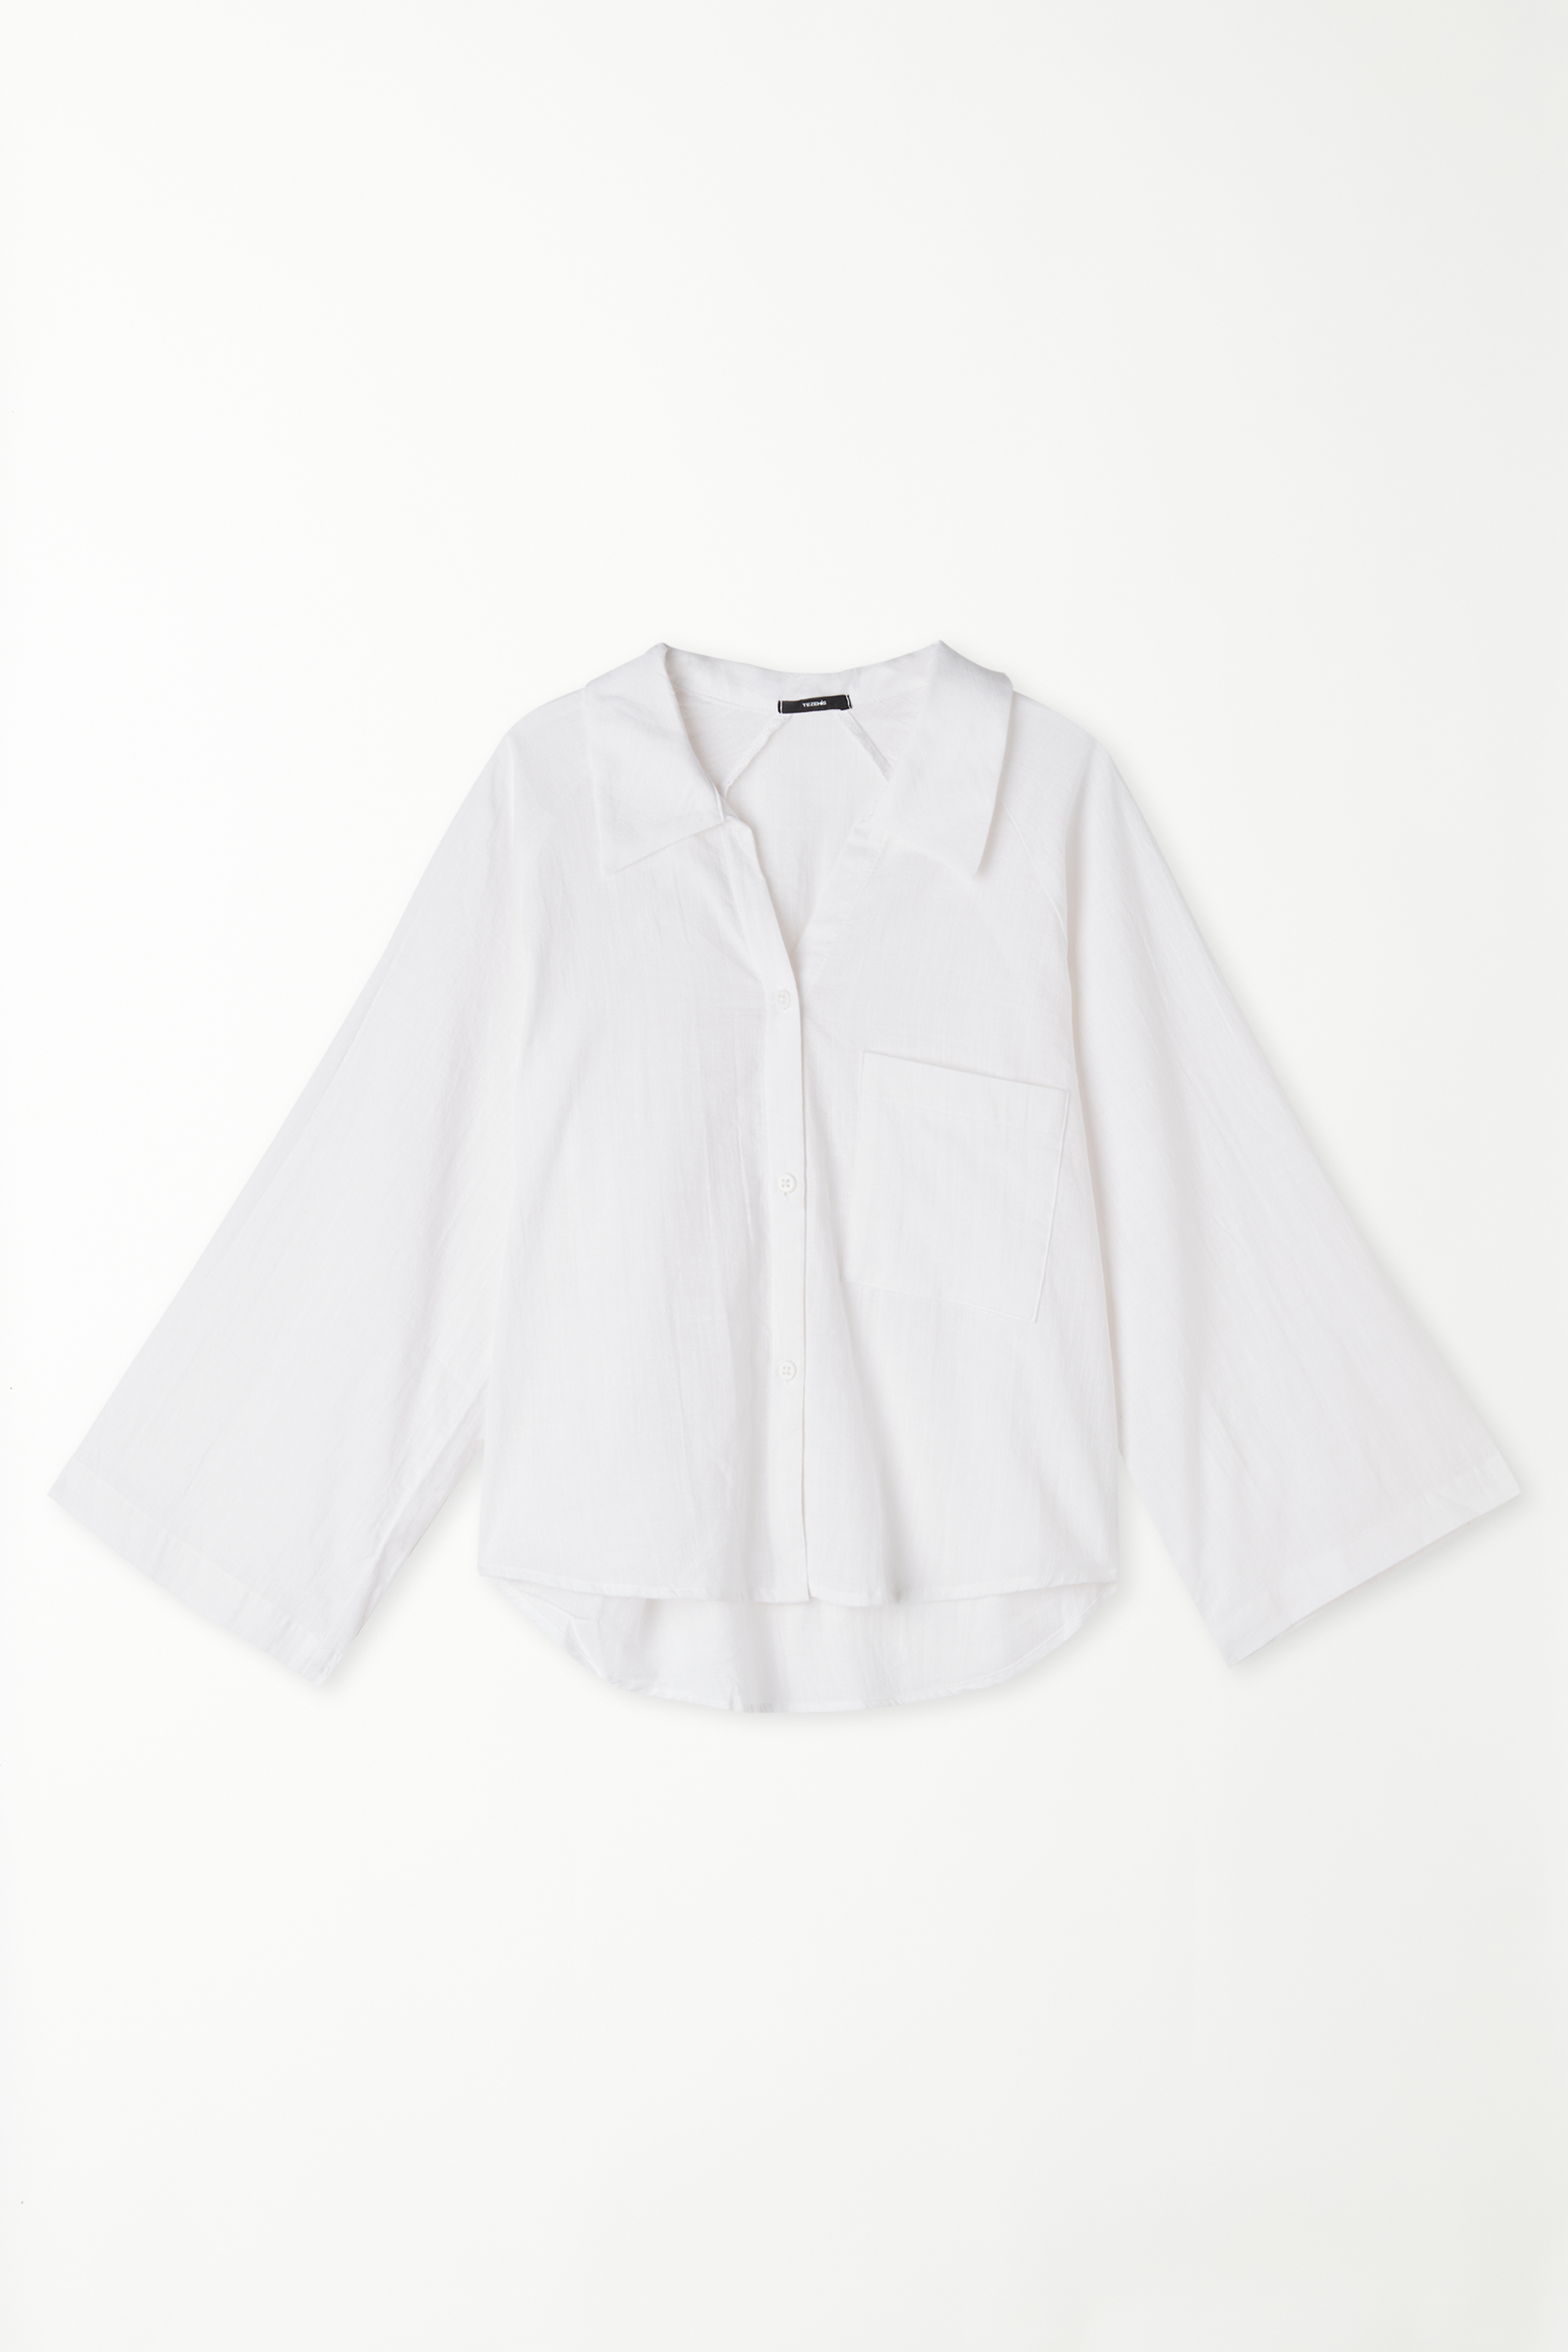 Loose 3/4 Sleeve Cropped Shirt in 100% Super Light Cotton